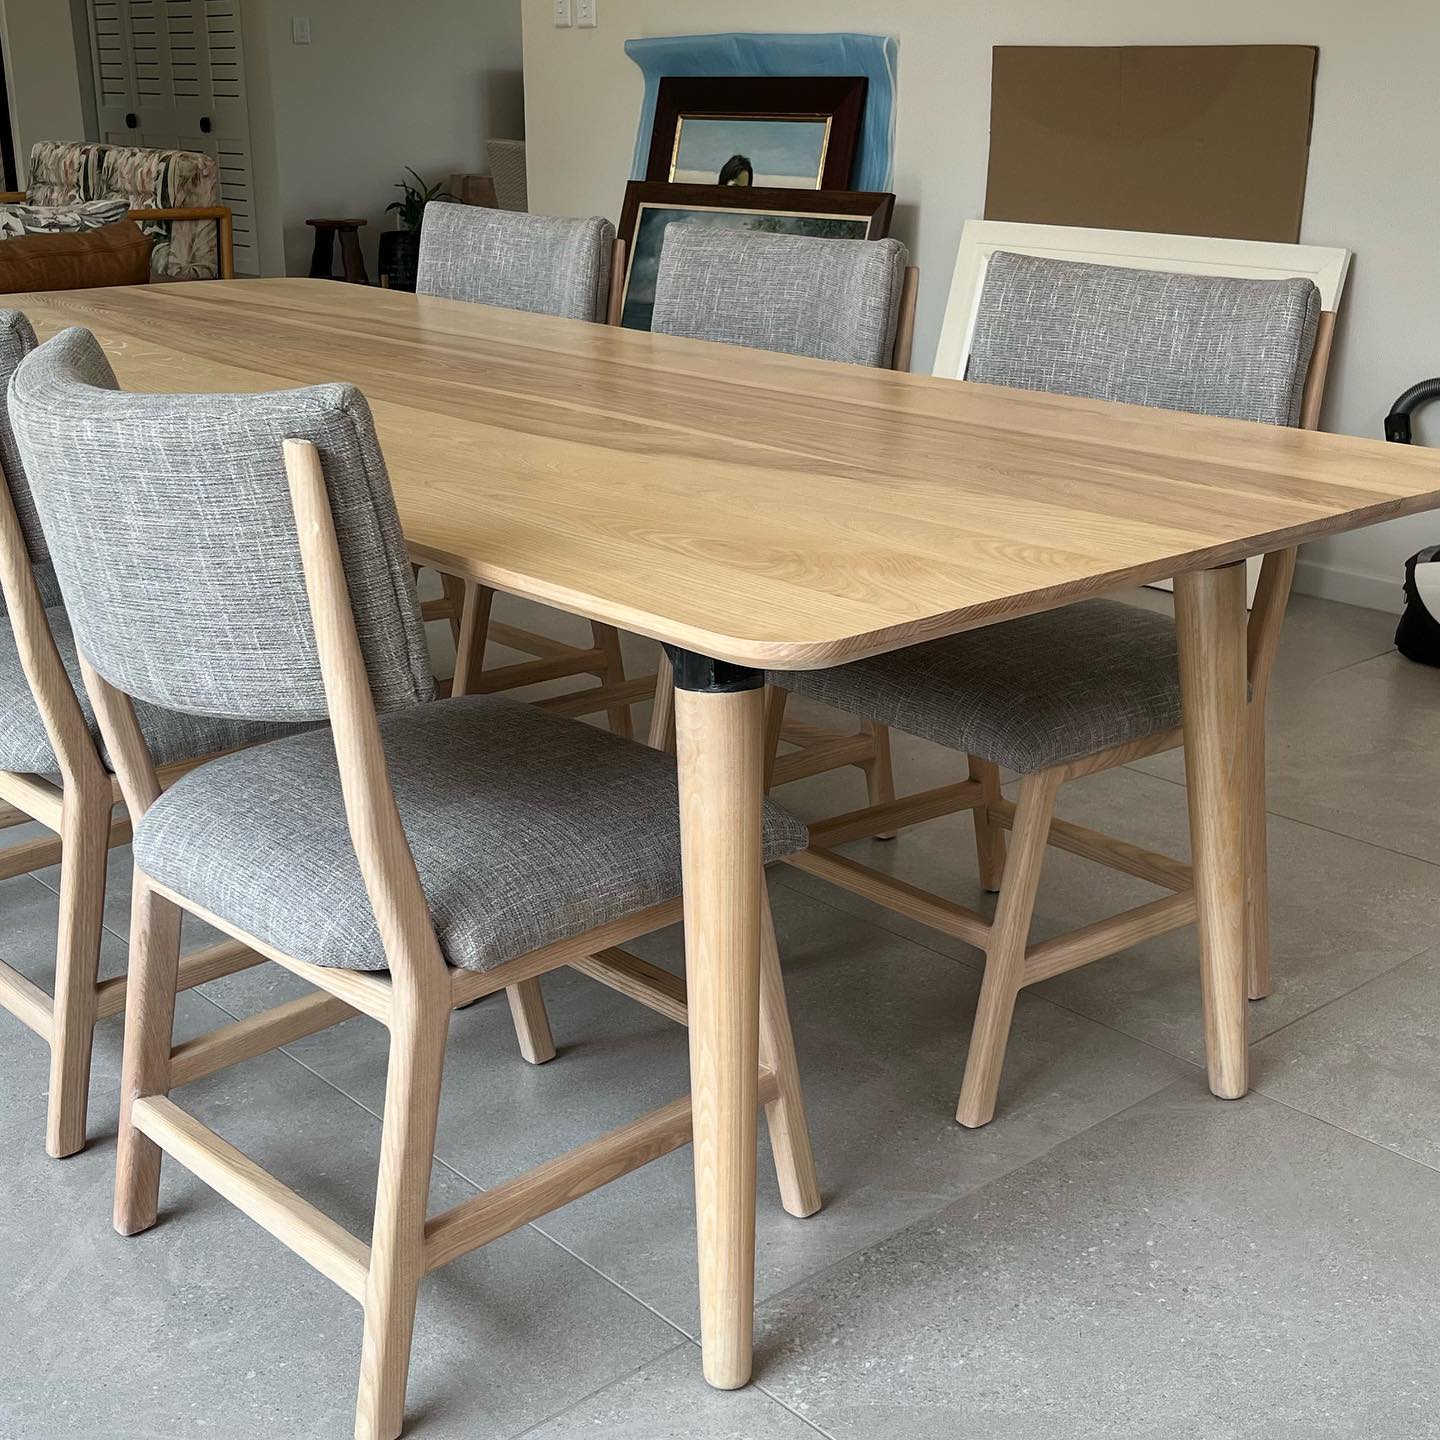 Dining table + chairs (3)